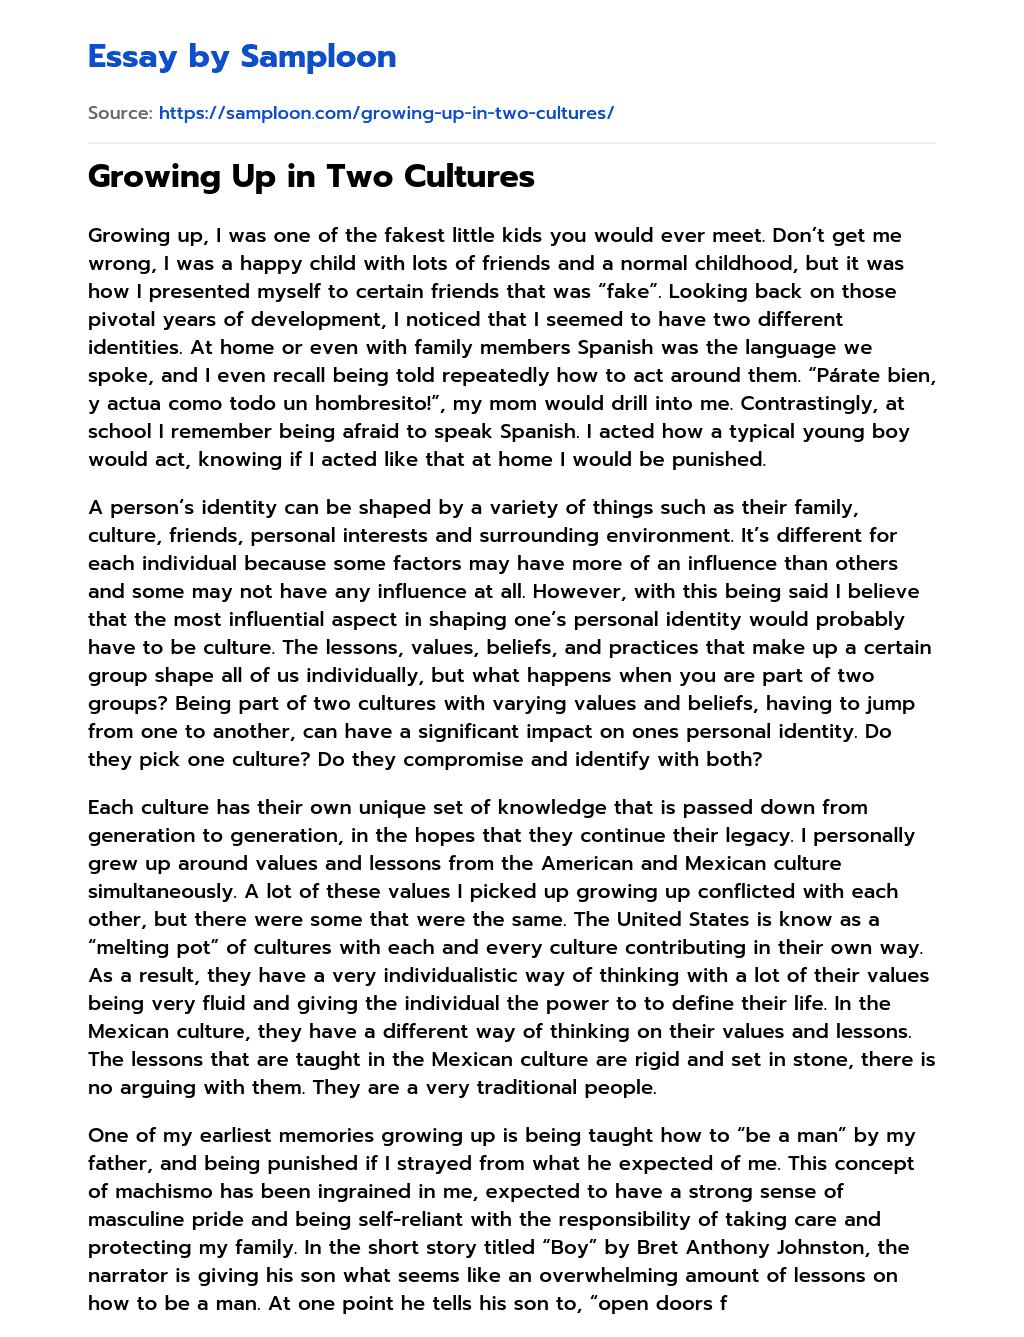 growing up in two cultures essay